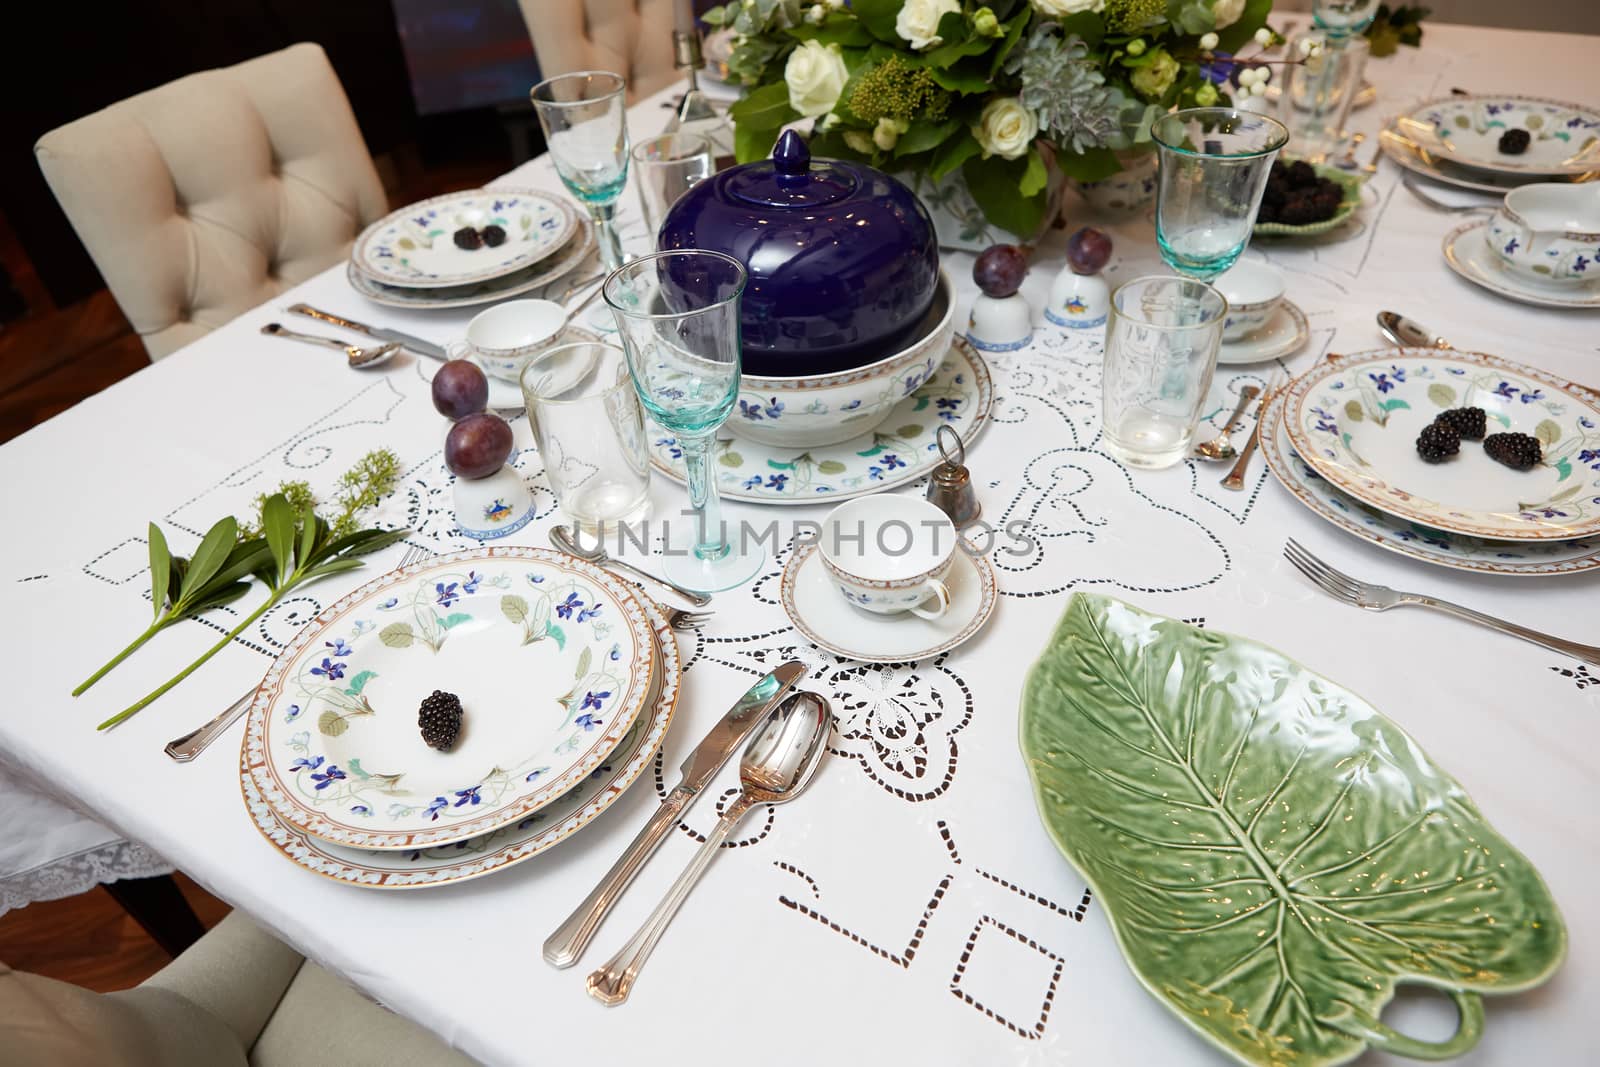 Beautifully decorated table set with flowers, candles, plates and serviettes for wedding or another event in the restaurant. by sarymsakov